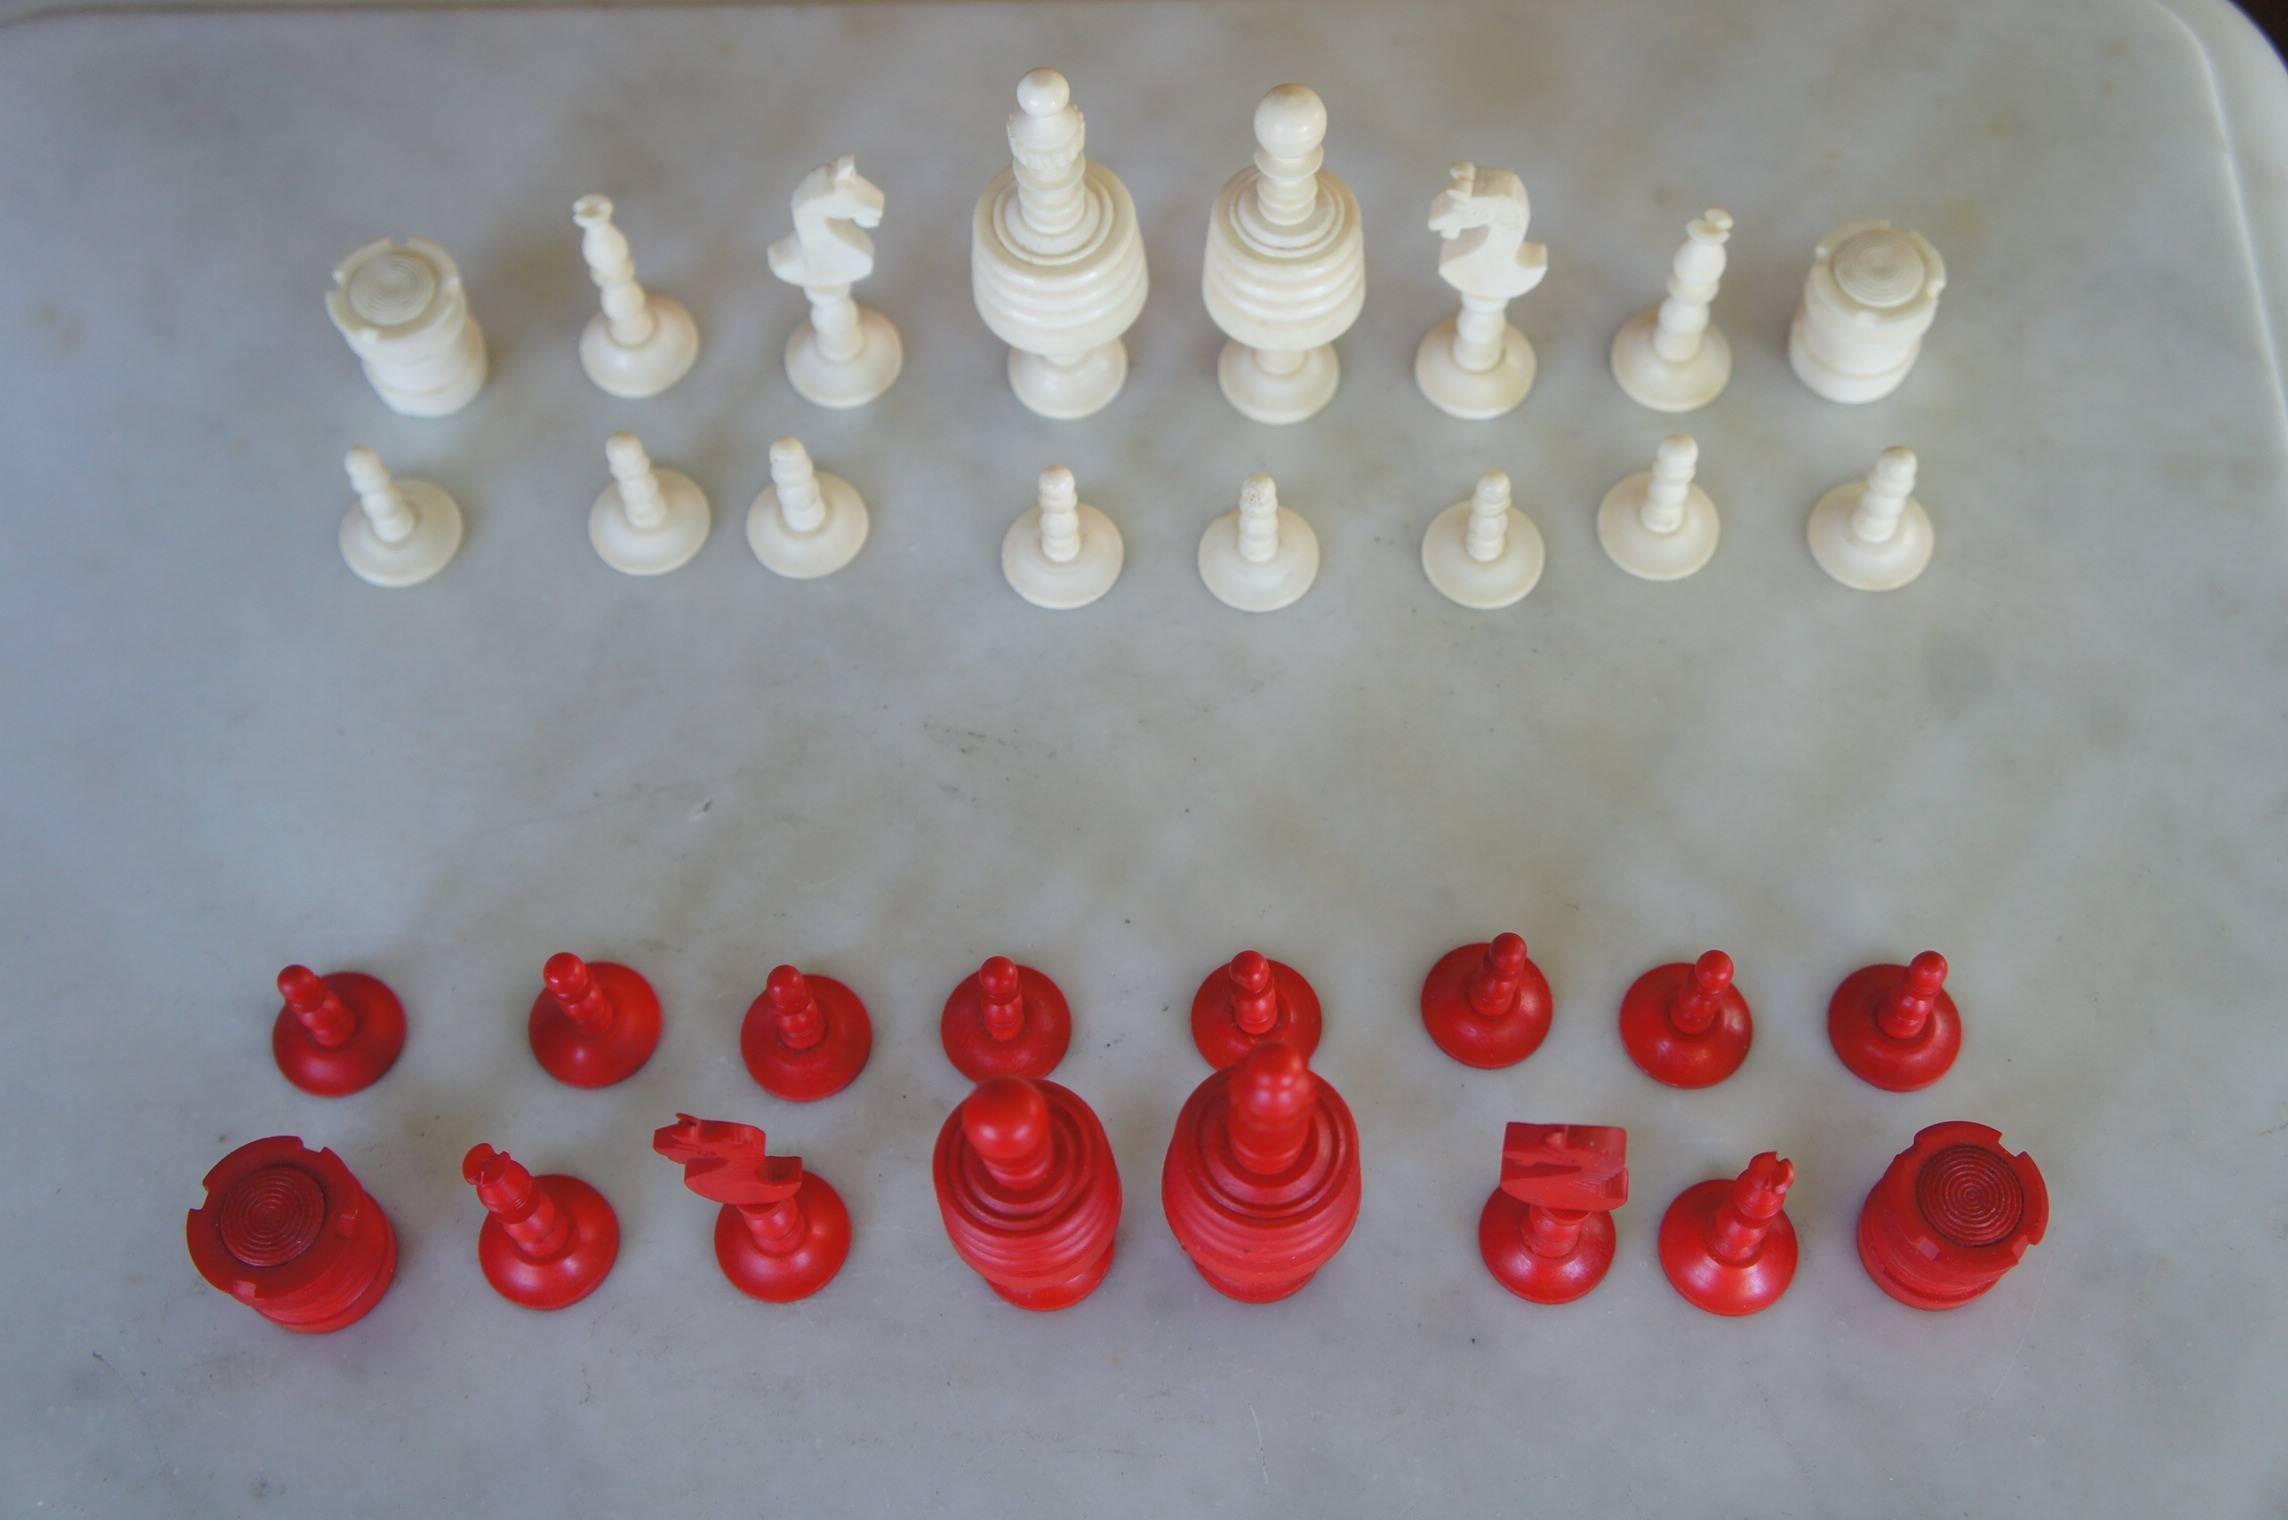 Also beautiful for display.

We recently acquired this antique and handcrafted set of chess pieces from a lady who had lived to be 89 years of age. It was said that this set had belonged to her grandfather who was in the army. For us, that makes